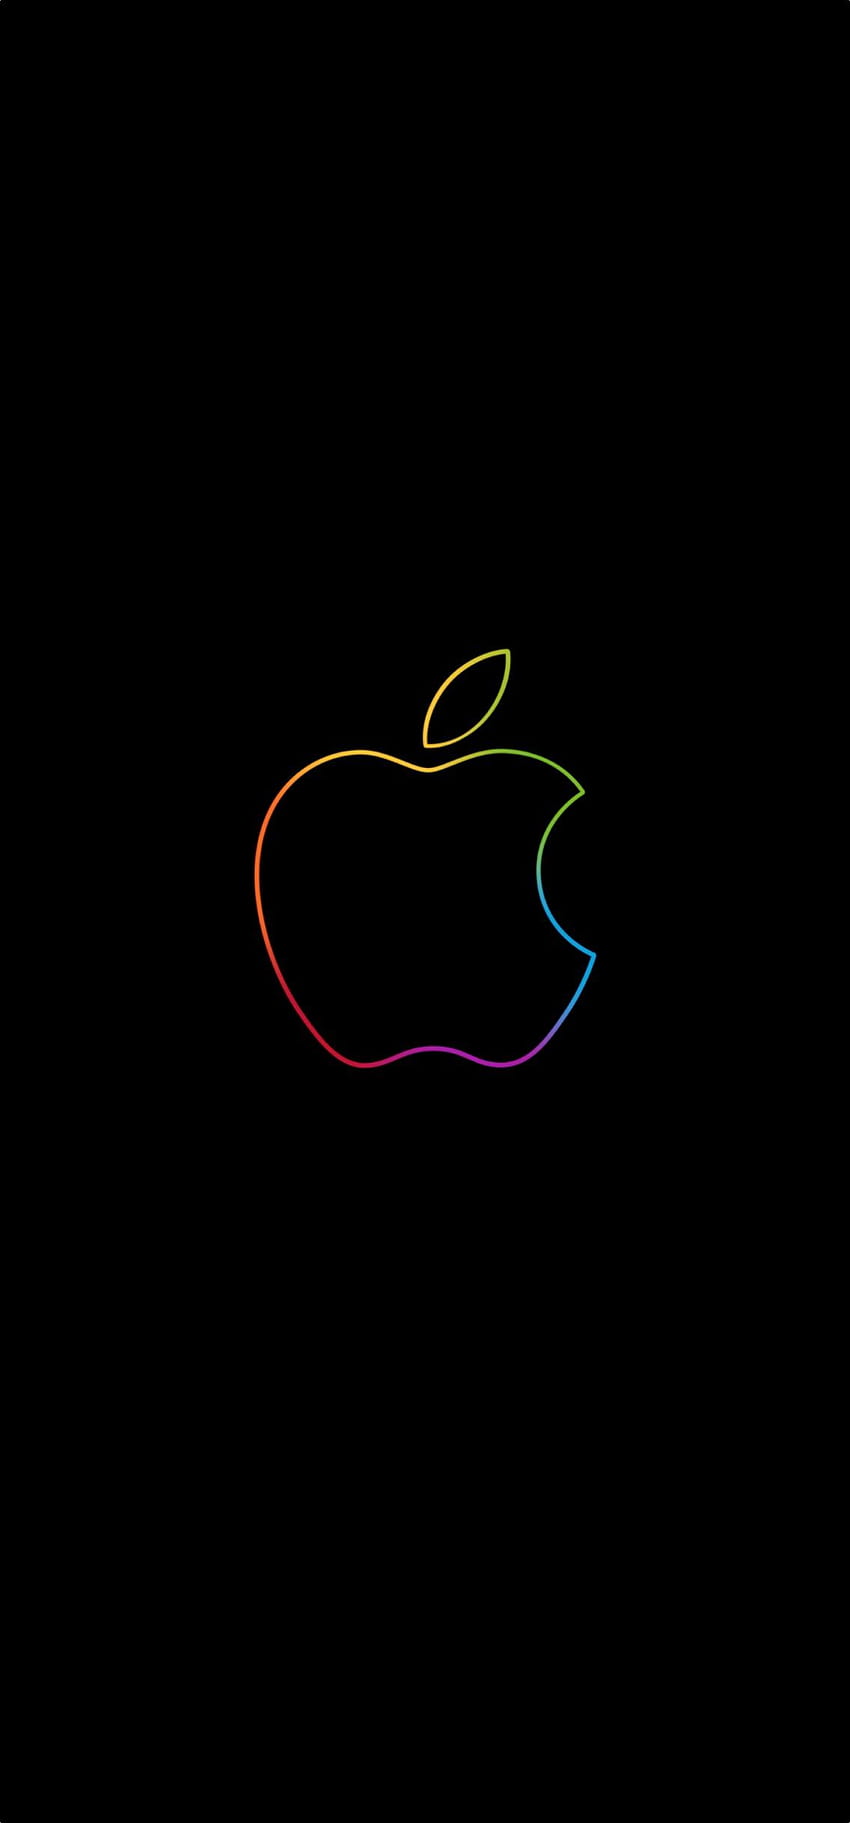 Apple Store Featuring The Colorful Apple, apple logo iphone HD phone wallpaper